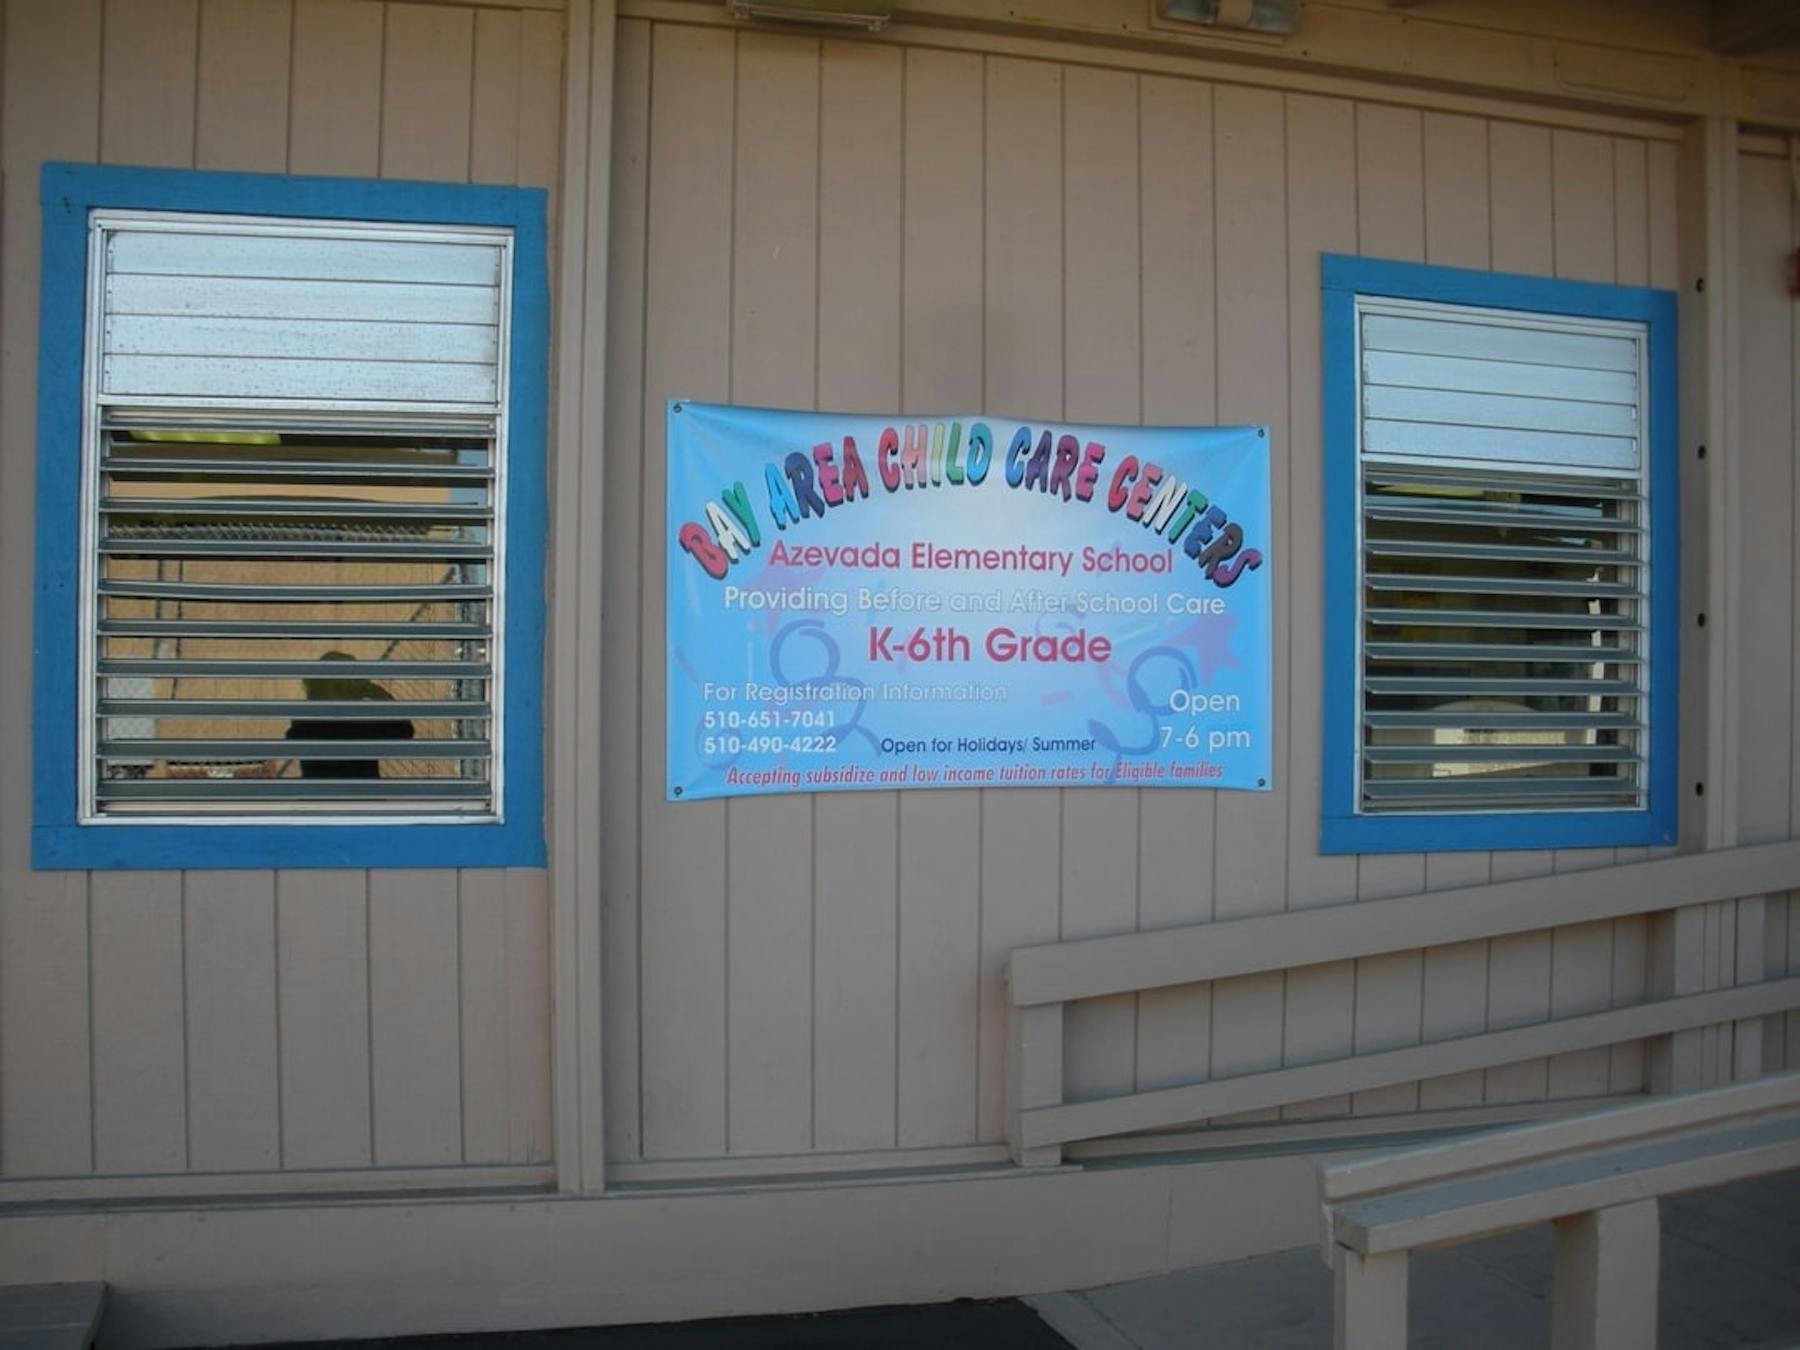 Bay Area Child Care Centers (Azevada Elementary) Daycare in Fremont